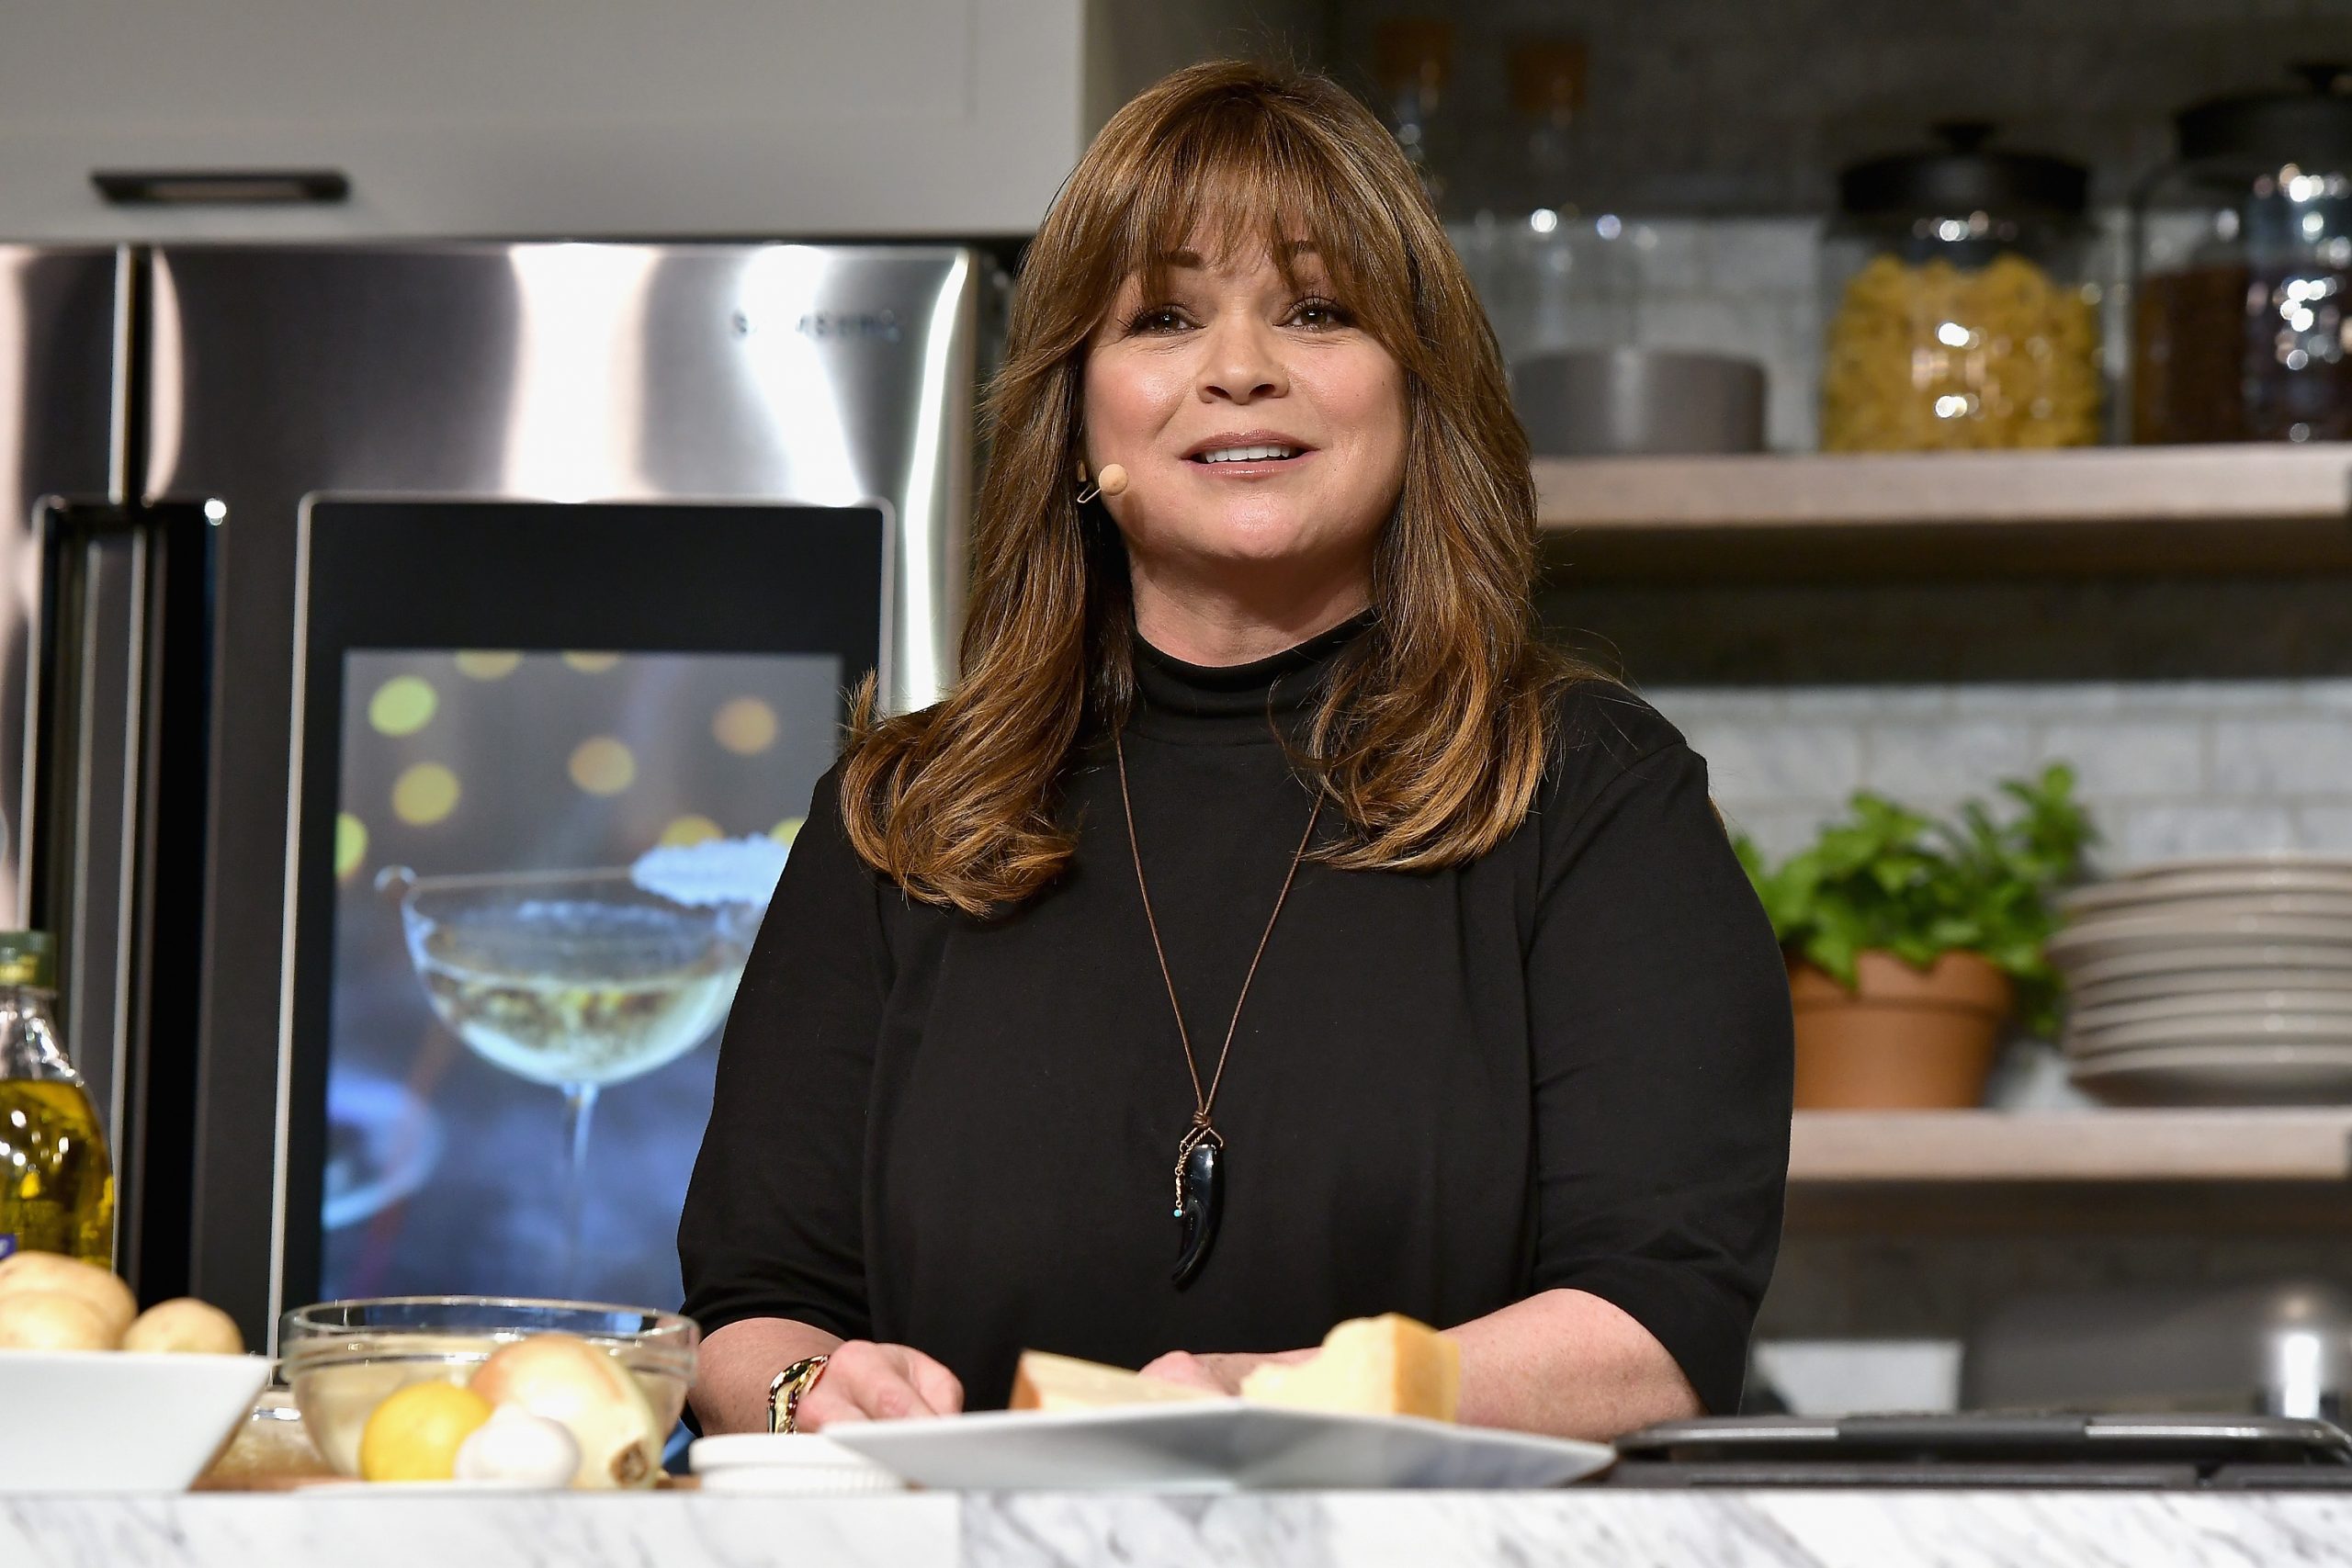 Celebrity chef Valerie Bertinelli wears a black turtleneck blouse in this photograph.